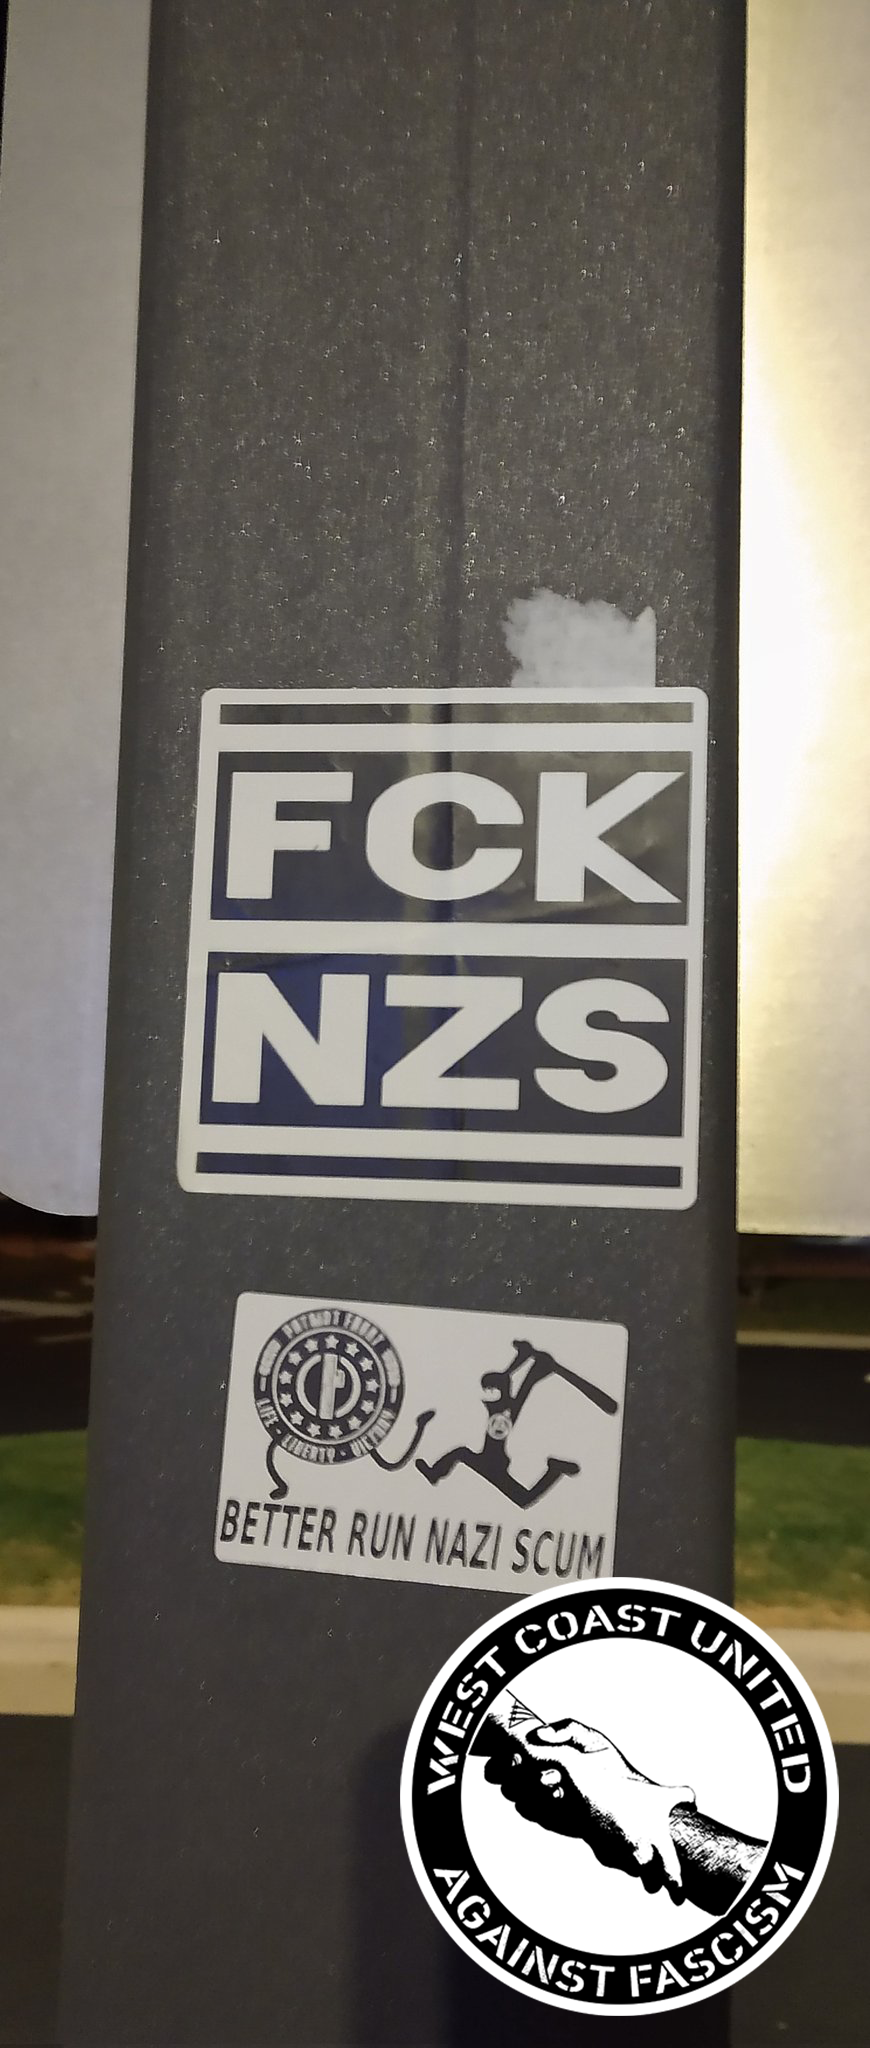 Two images adhear to a metal post. One reads "FCK NZS" in black and white. The one below it shows a picture of the Patriot Front symbol having legs, running away from a stick figure in all black, carrying a bat and wearing a balaclava with an anarchist "circle a" symbol on it. Below reads, "Better Run Nazi Scum"